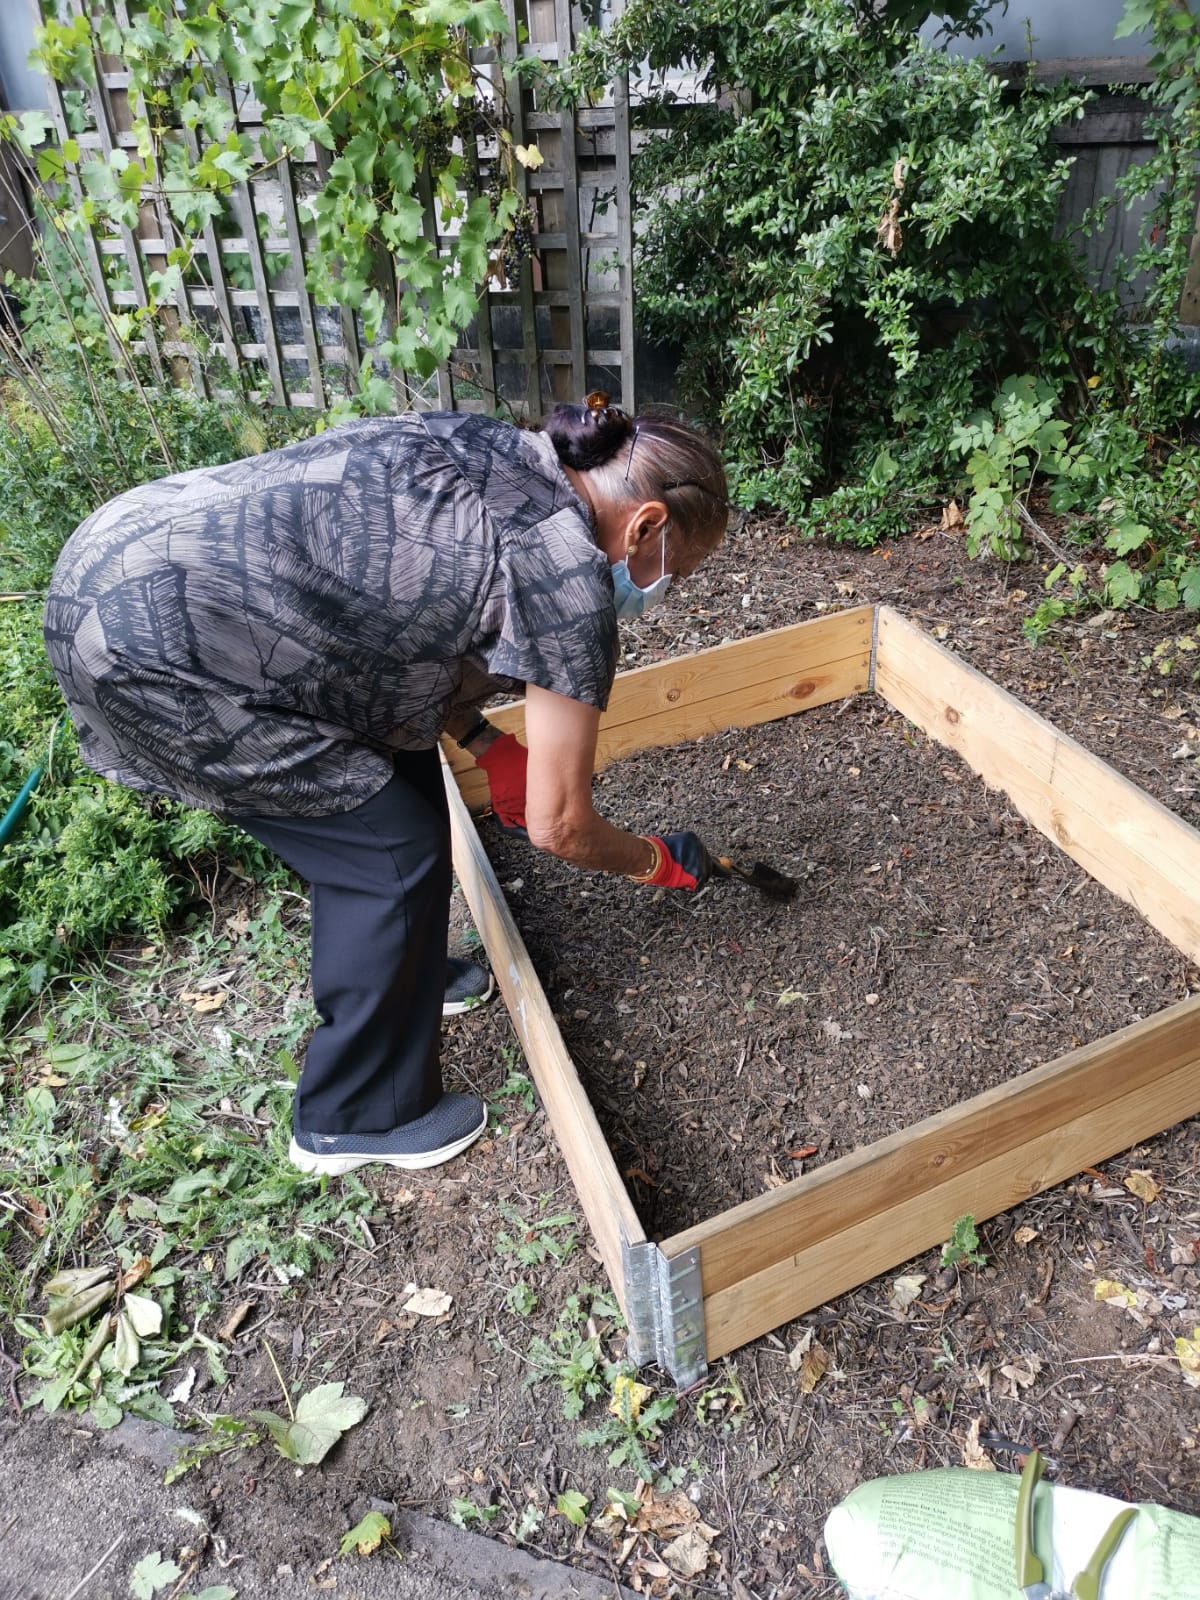 tending to raised beds